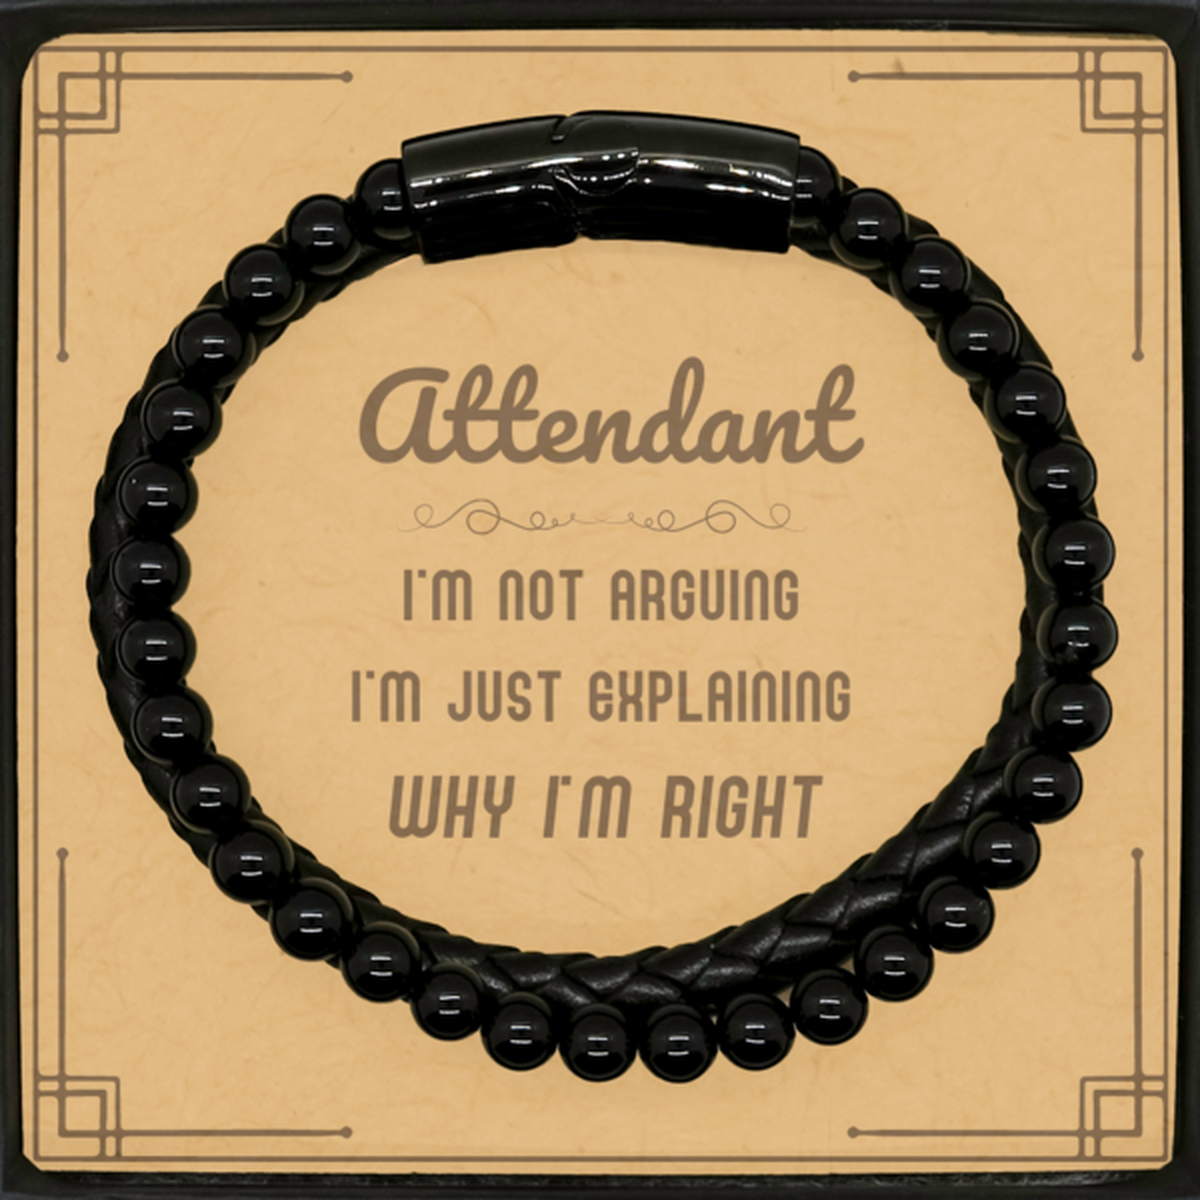 Attendant I'm not Arguing. I'm Just Explaining Why I'm RIGHT Stone Leather Bracelets, Funny Saying Quote Attendant Gifts For Attendant Message Card Graduation Birthday Christmas Gifts for Men Women Coworker